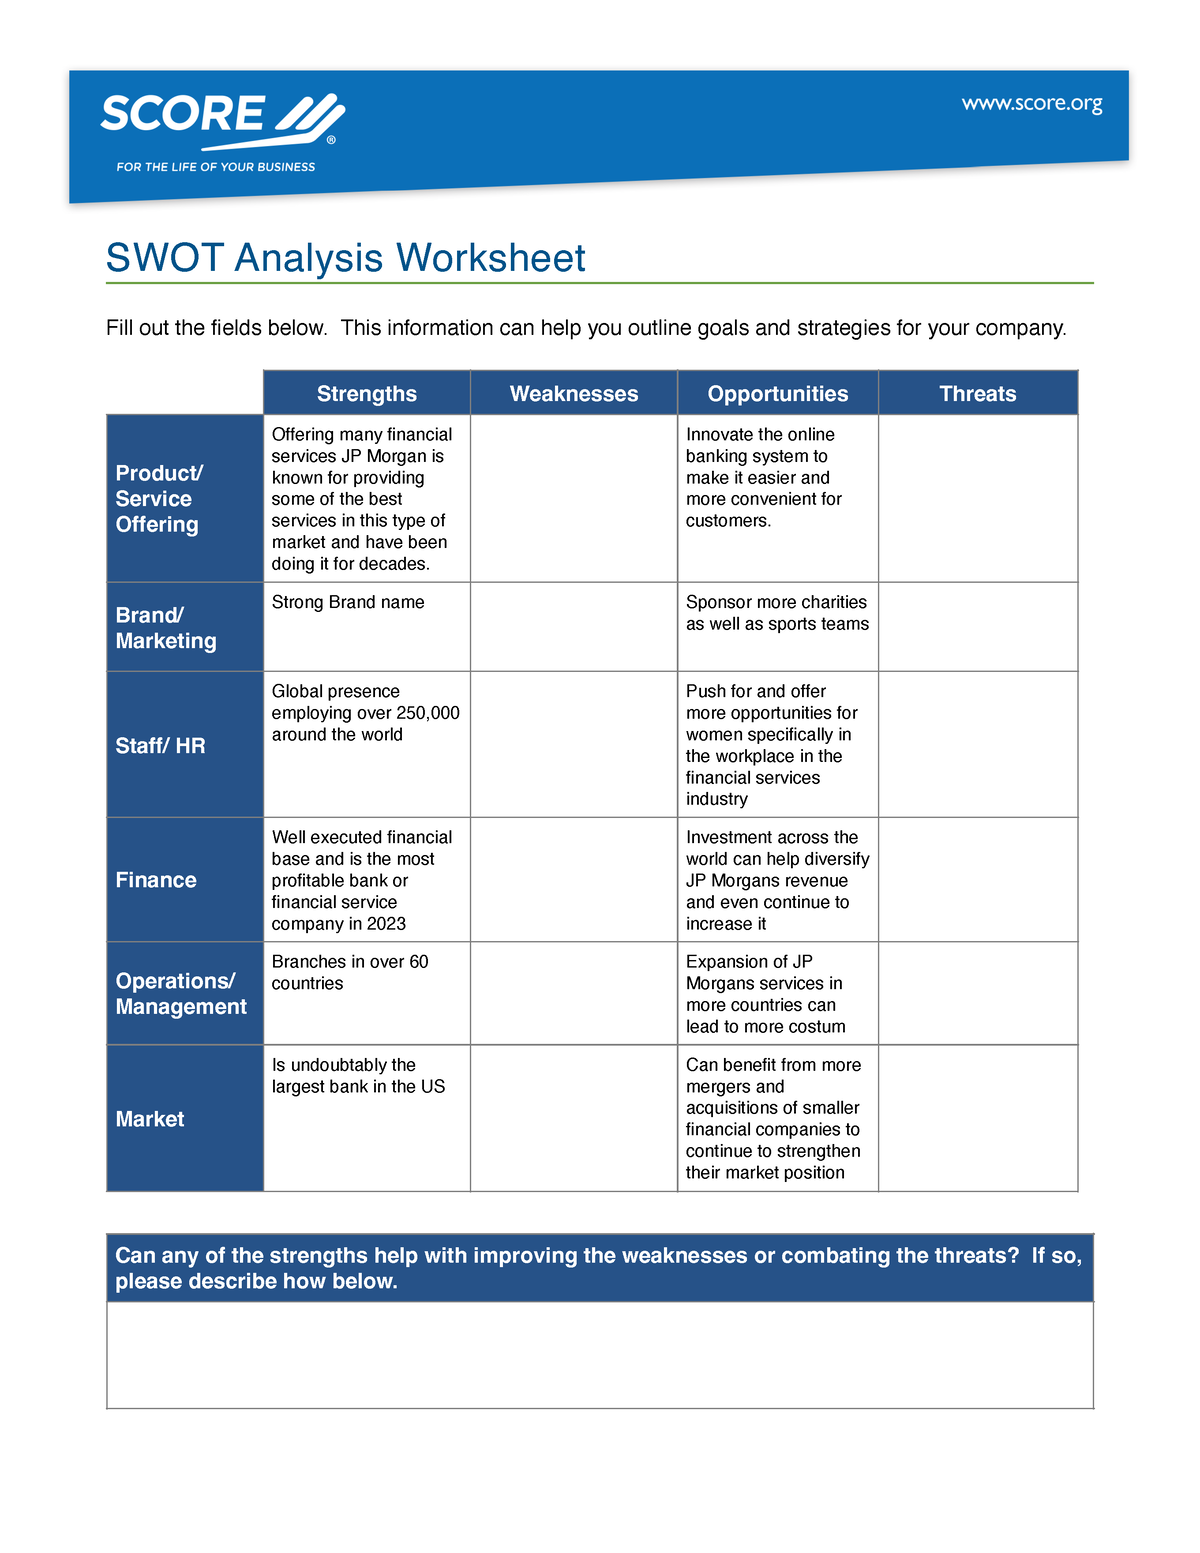 SWOT-Analysis-Worksheet 2 - SWOT Analysis Worksheet Fill out the fields ...